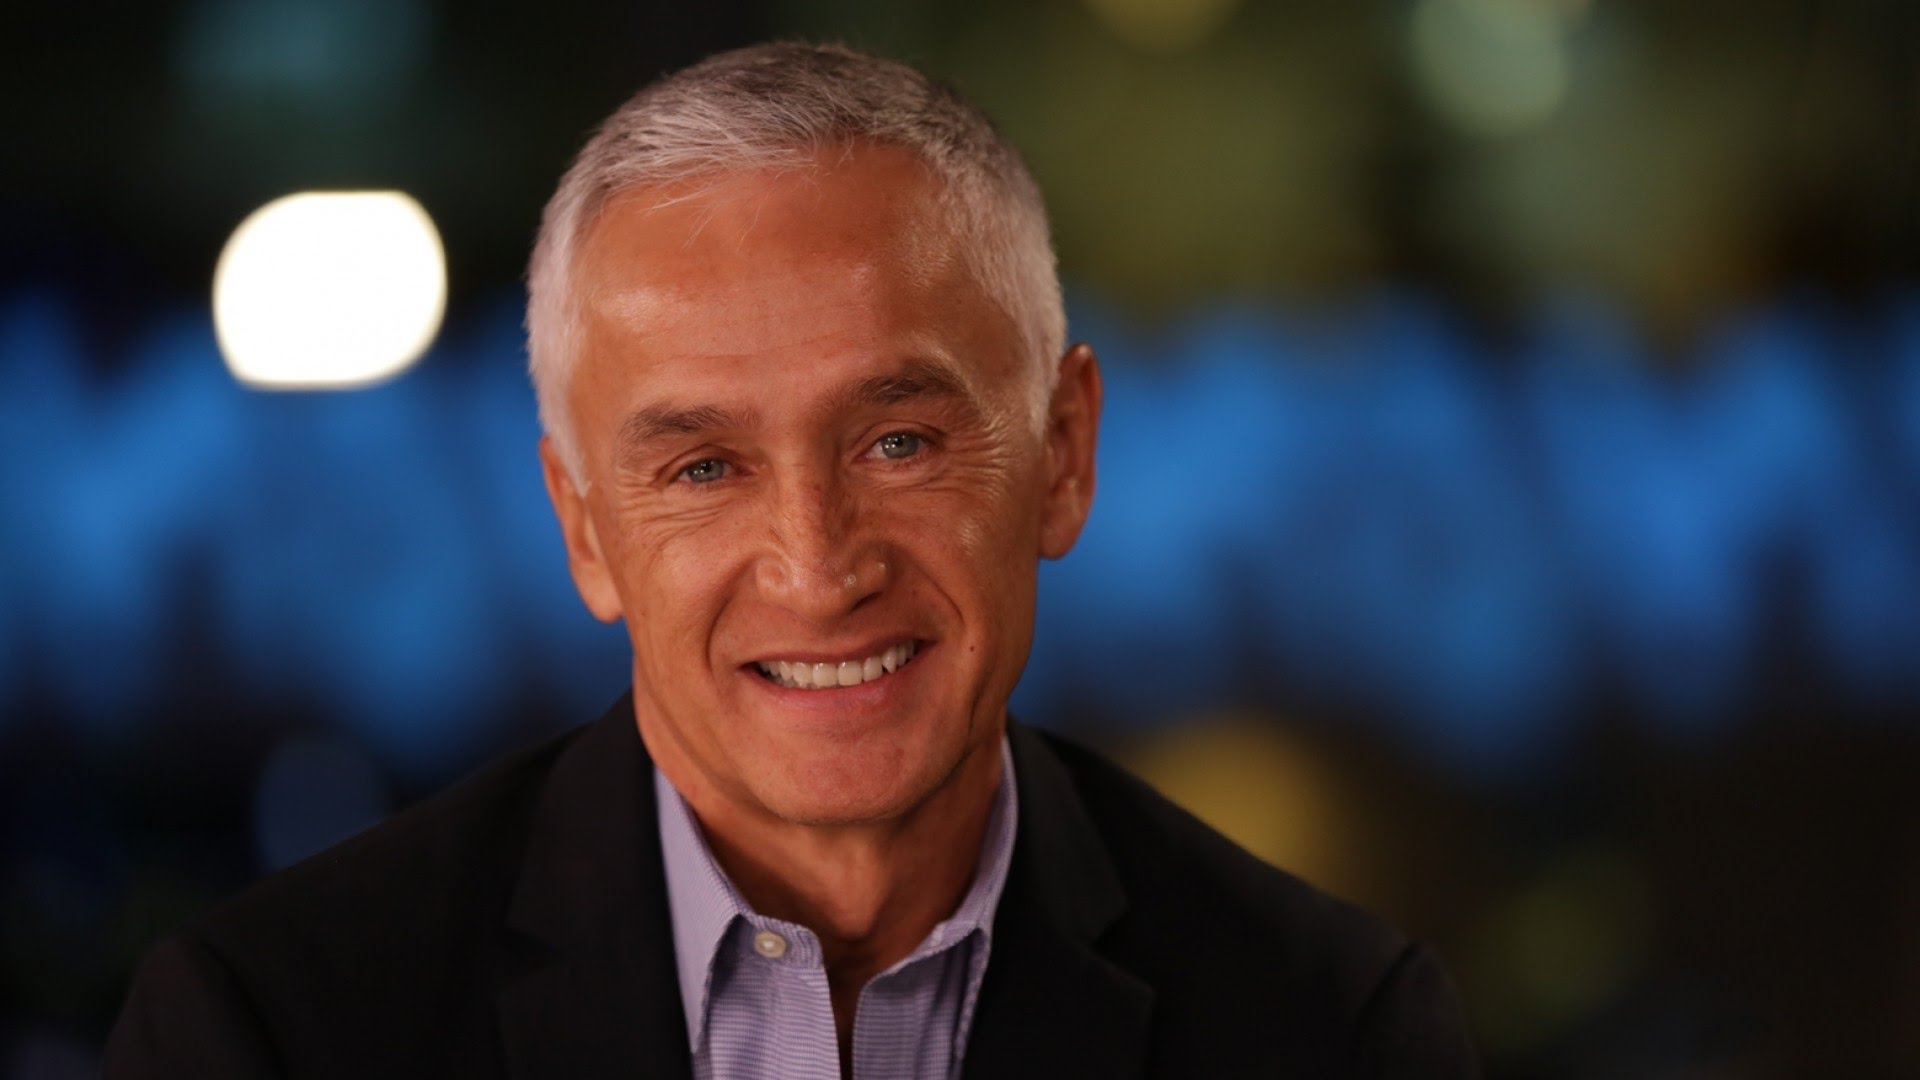 20 Quotes by Jorge Ramos on Immigration.